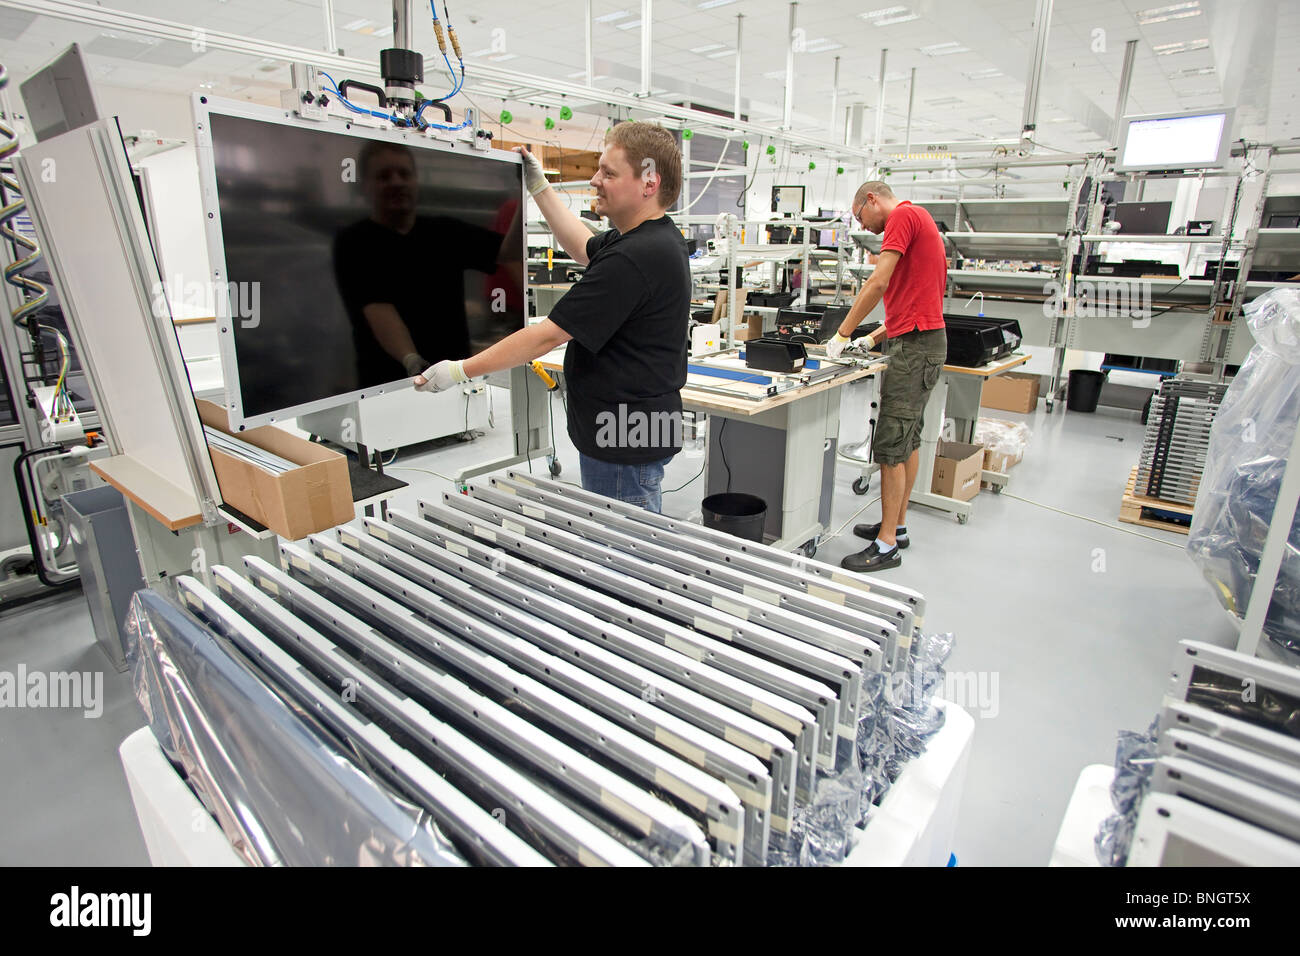 Production of high-value flat screen LCD television sets by Loewe AG, Kronach, Germany Stock Photo